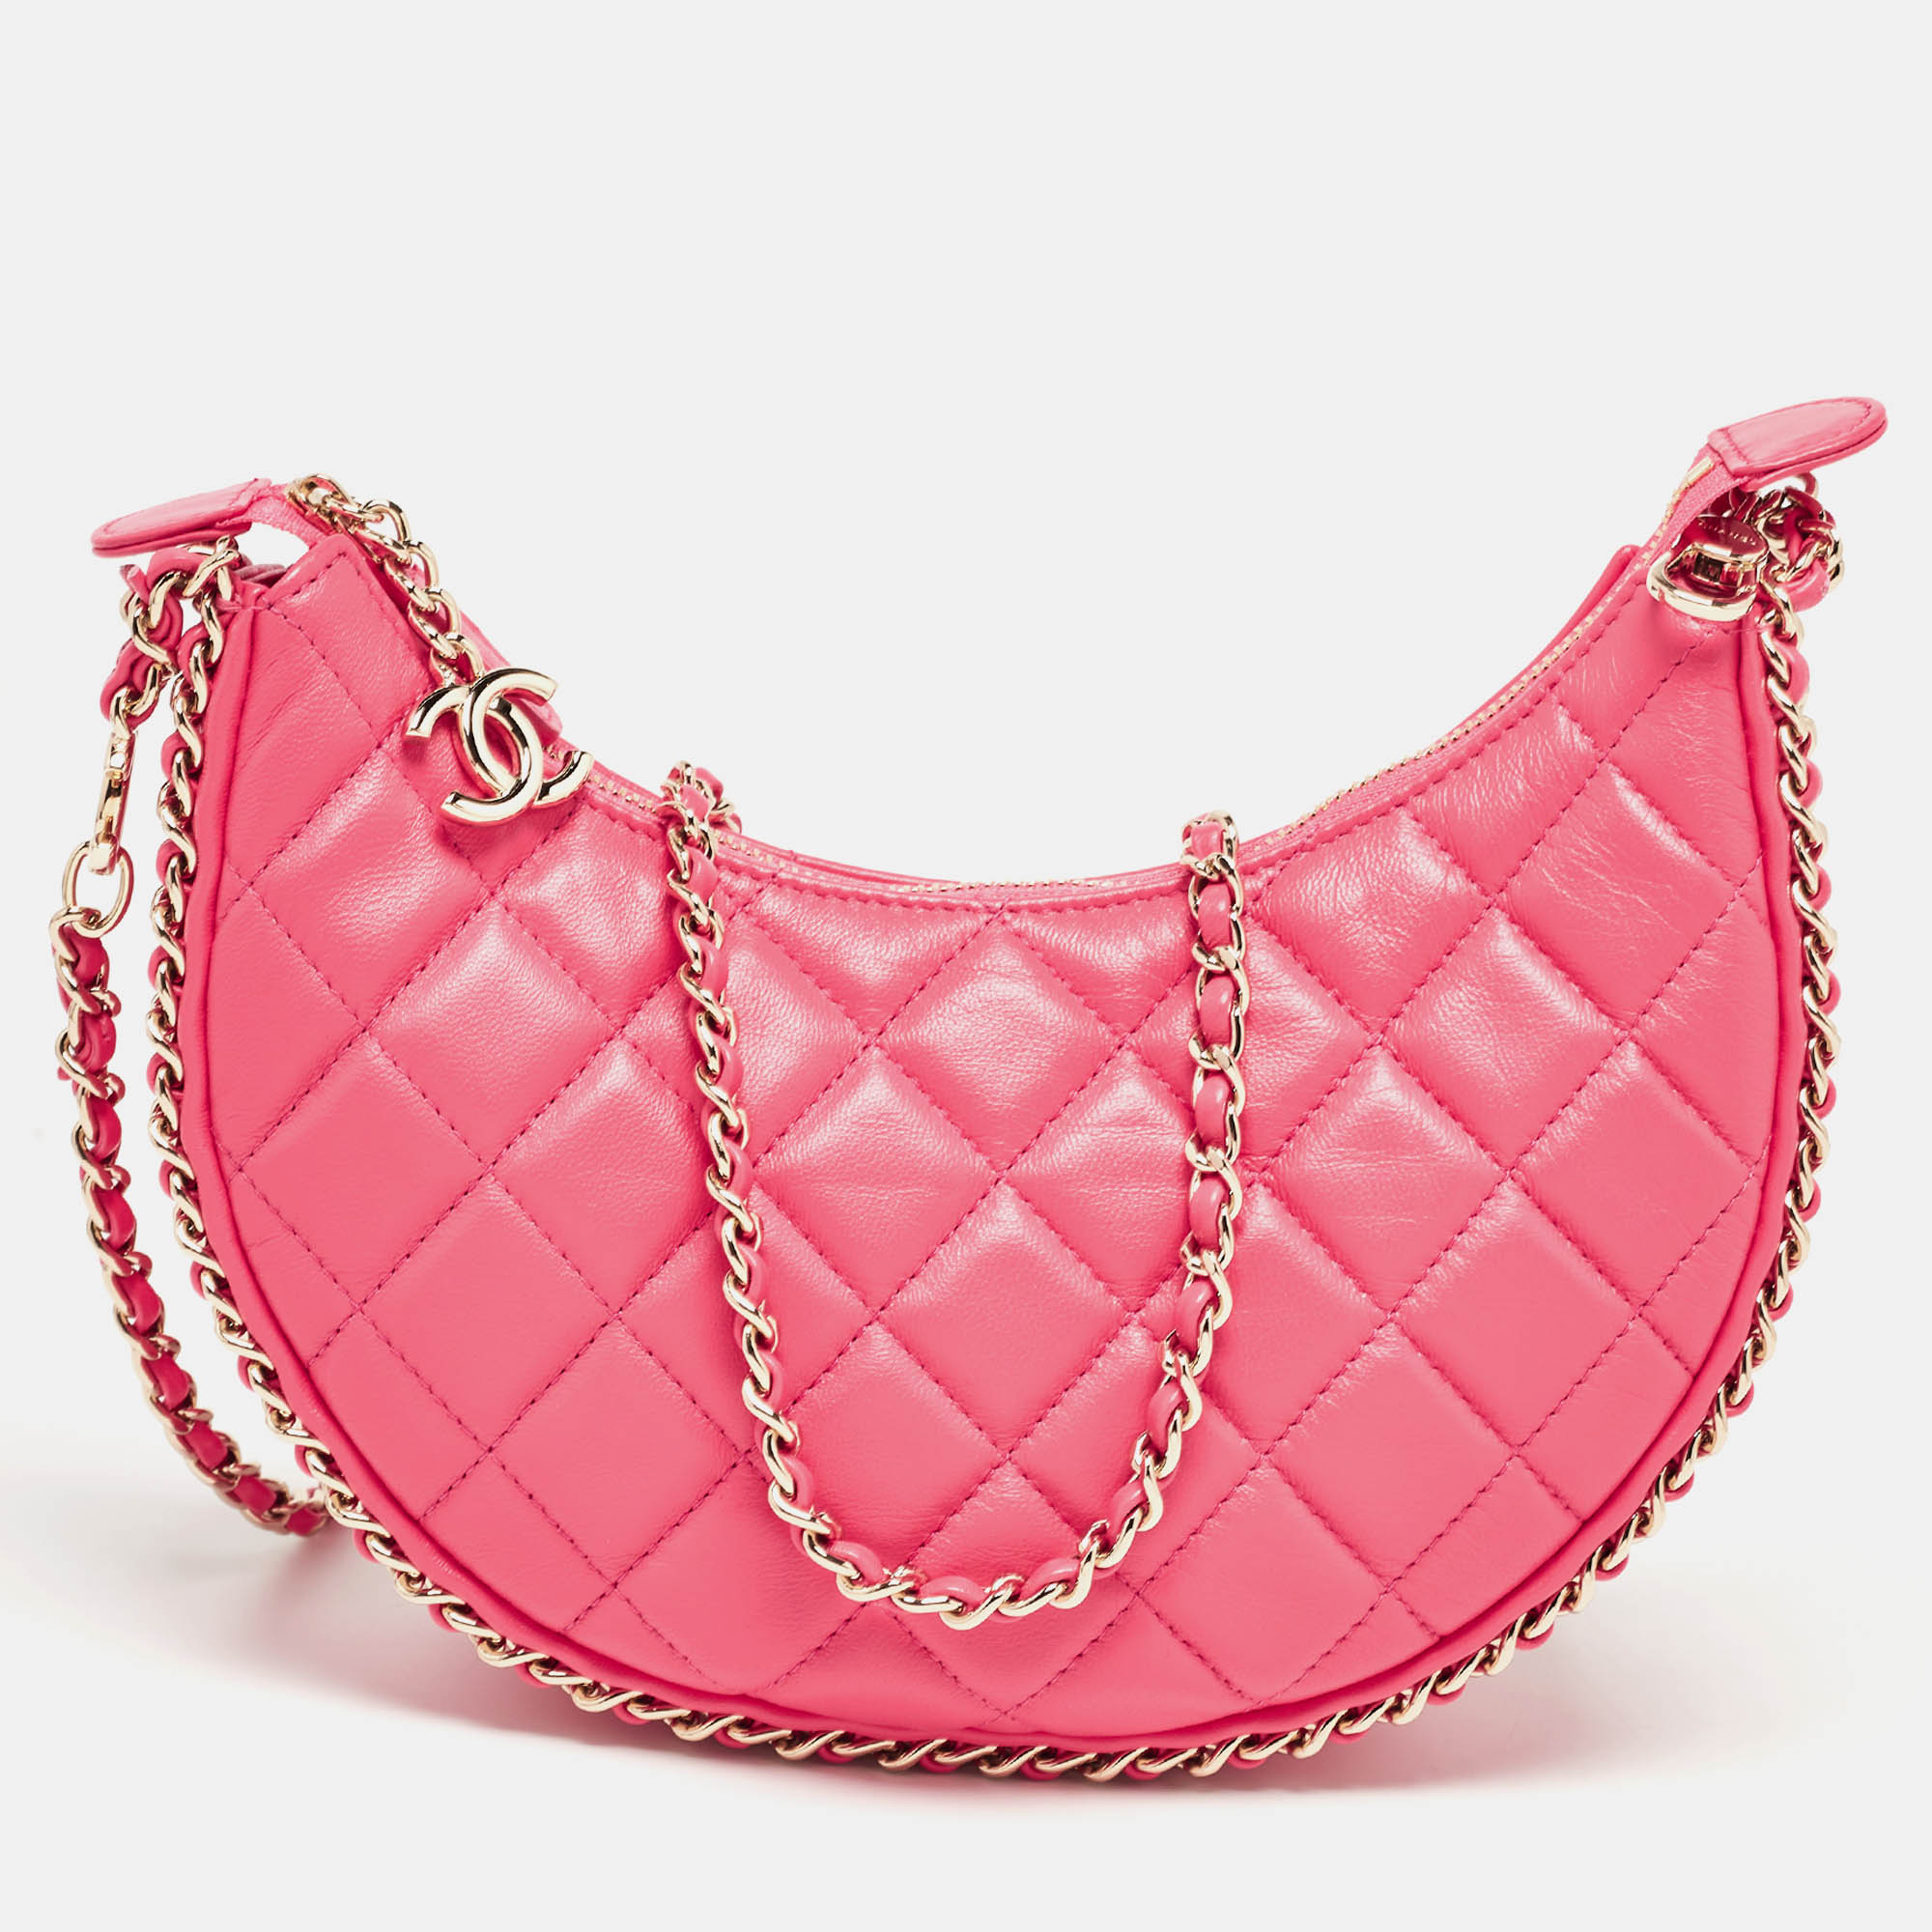 Chanel pink quilted leather cc moon bag